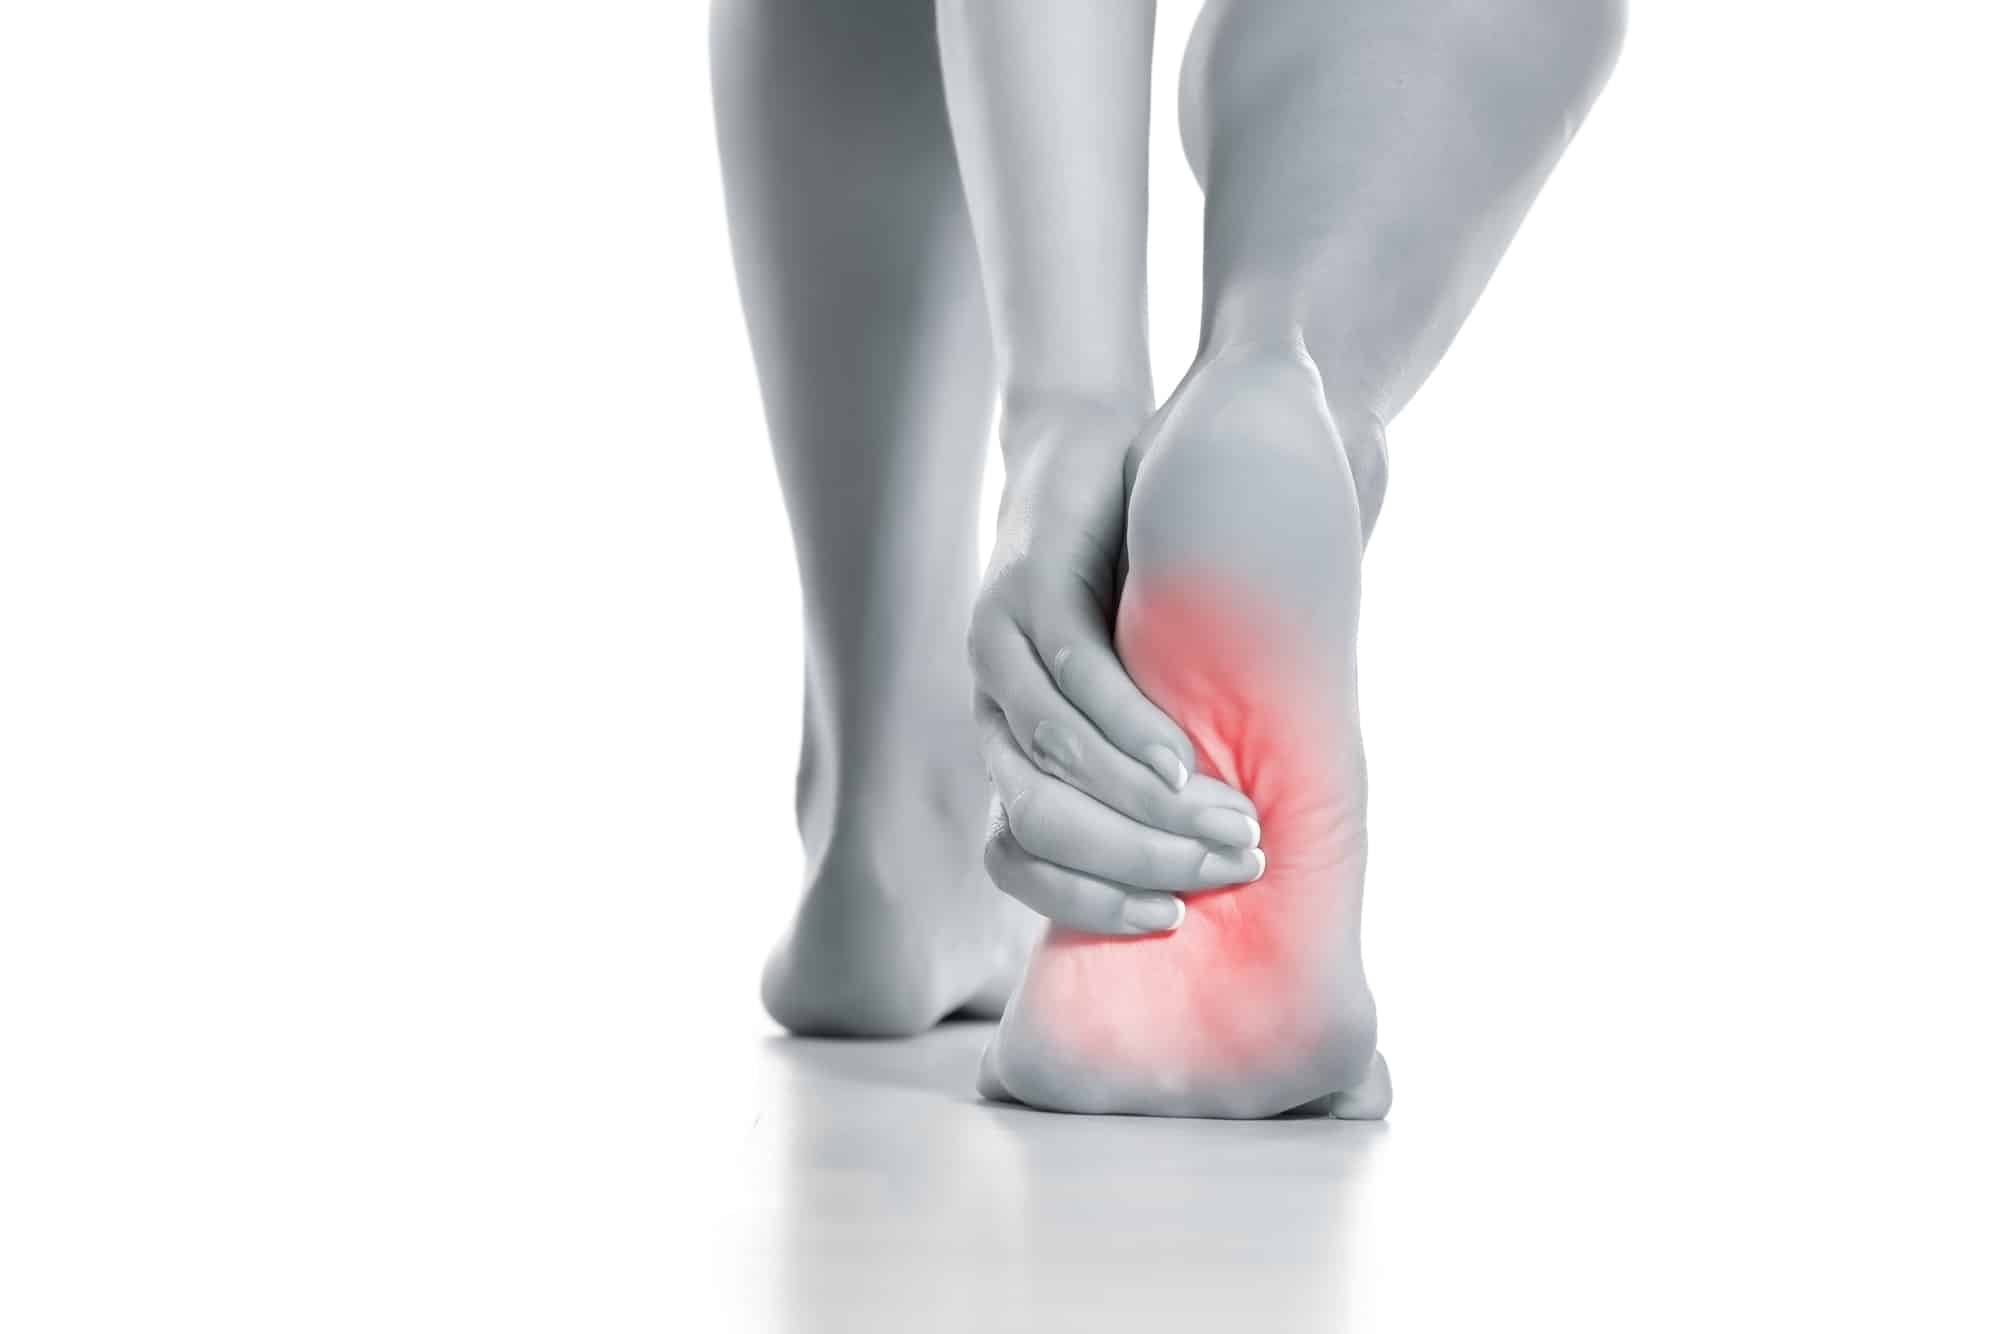 Physical Therapy Exercises For Foot Pain: Plantar Fasciitis